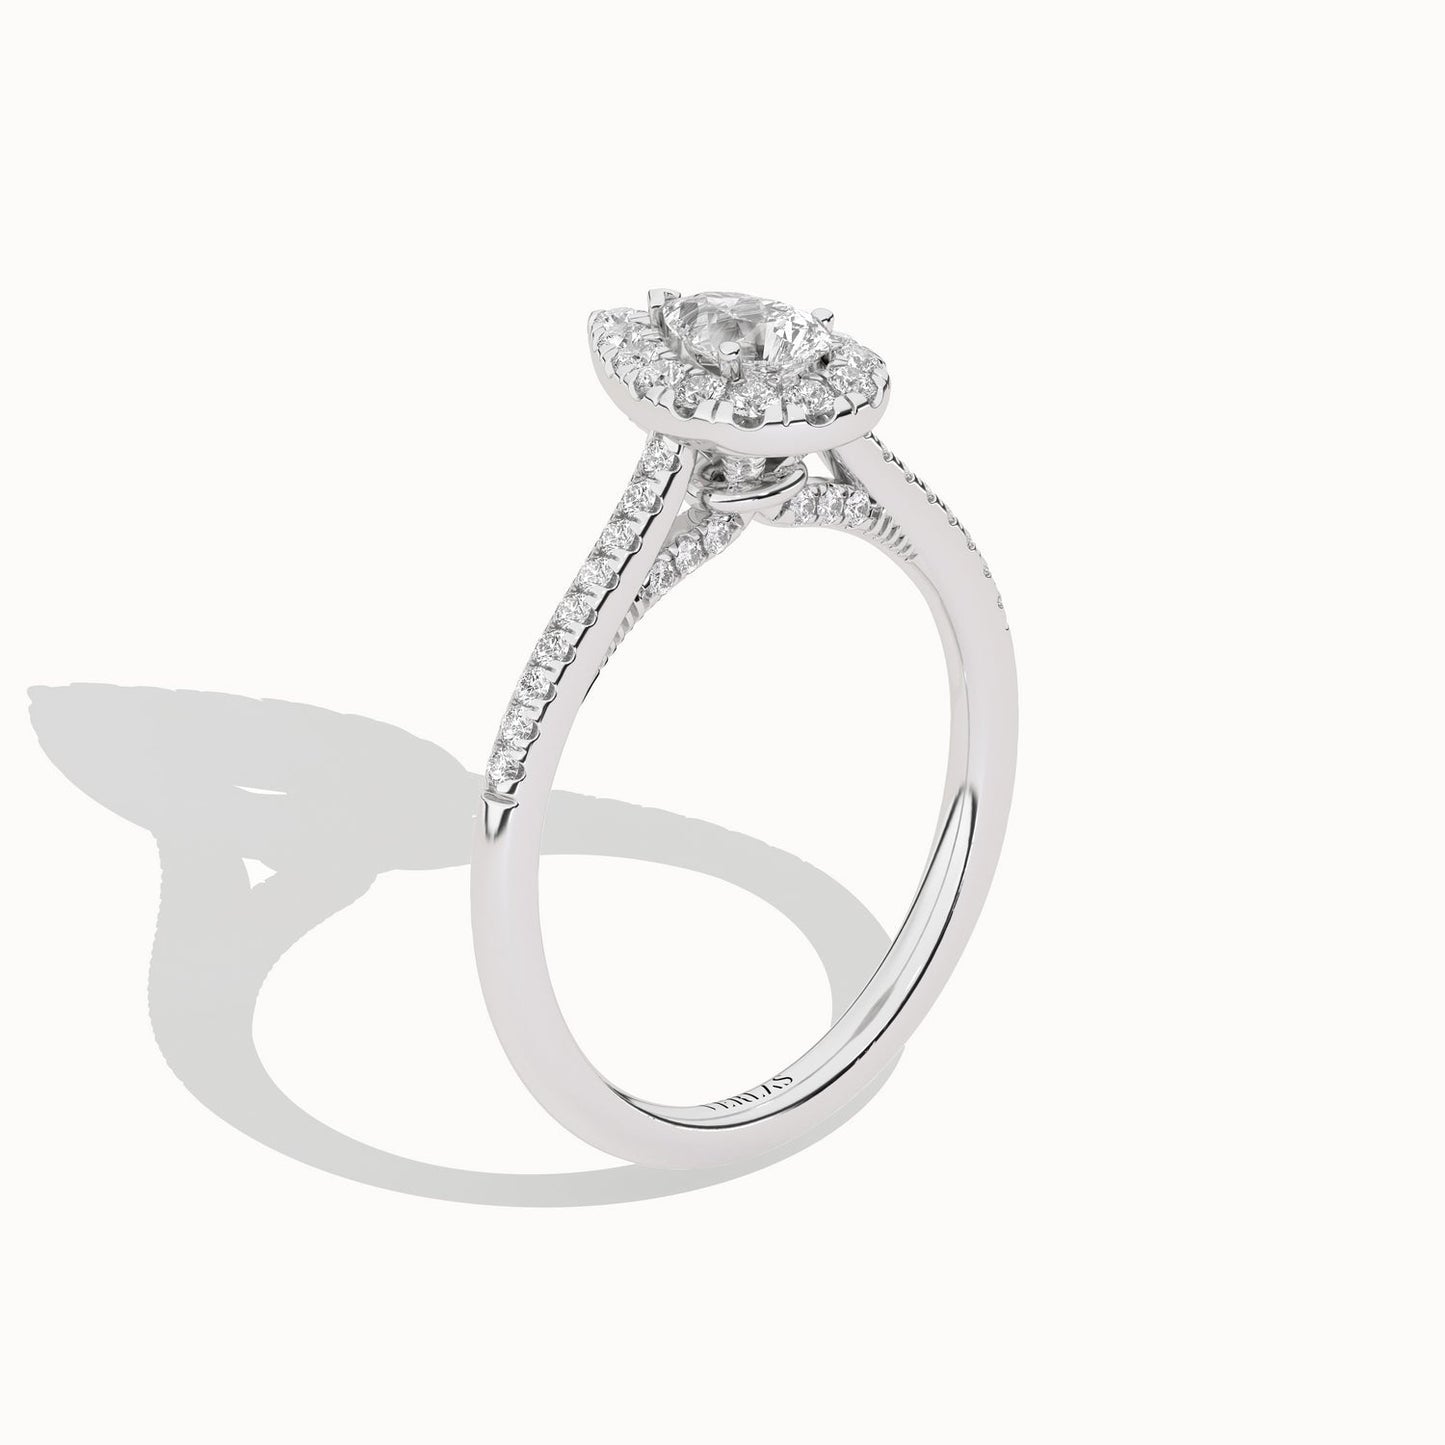 Signature Dewdrop Halo Ring_Product Angle_3/4Ct - 2